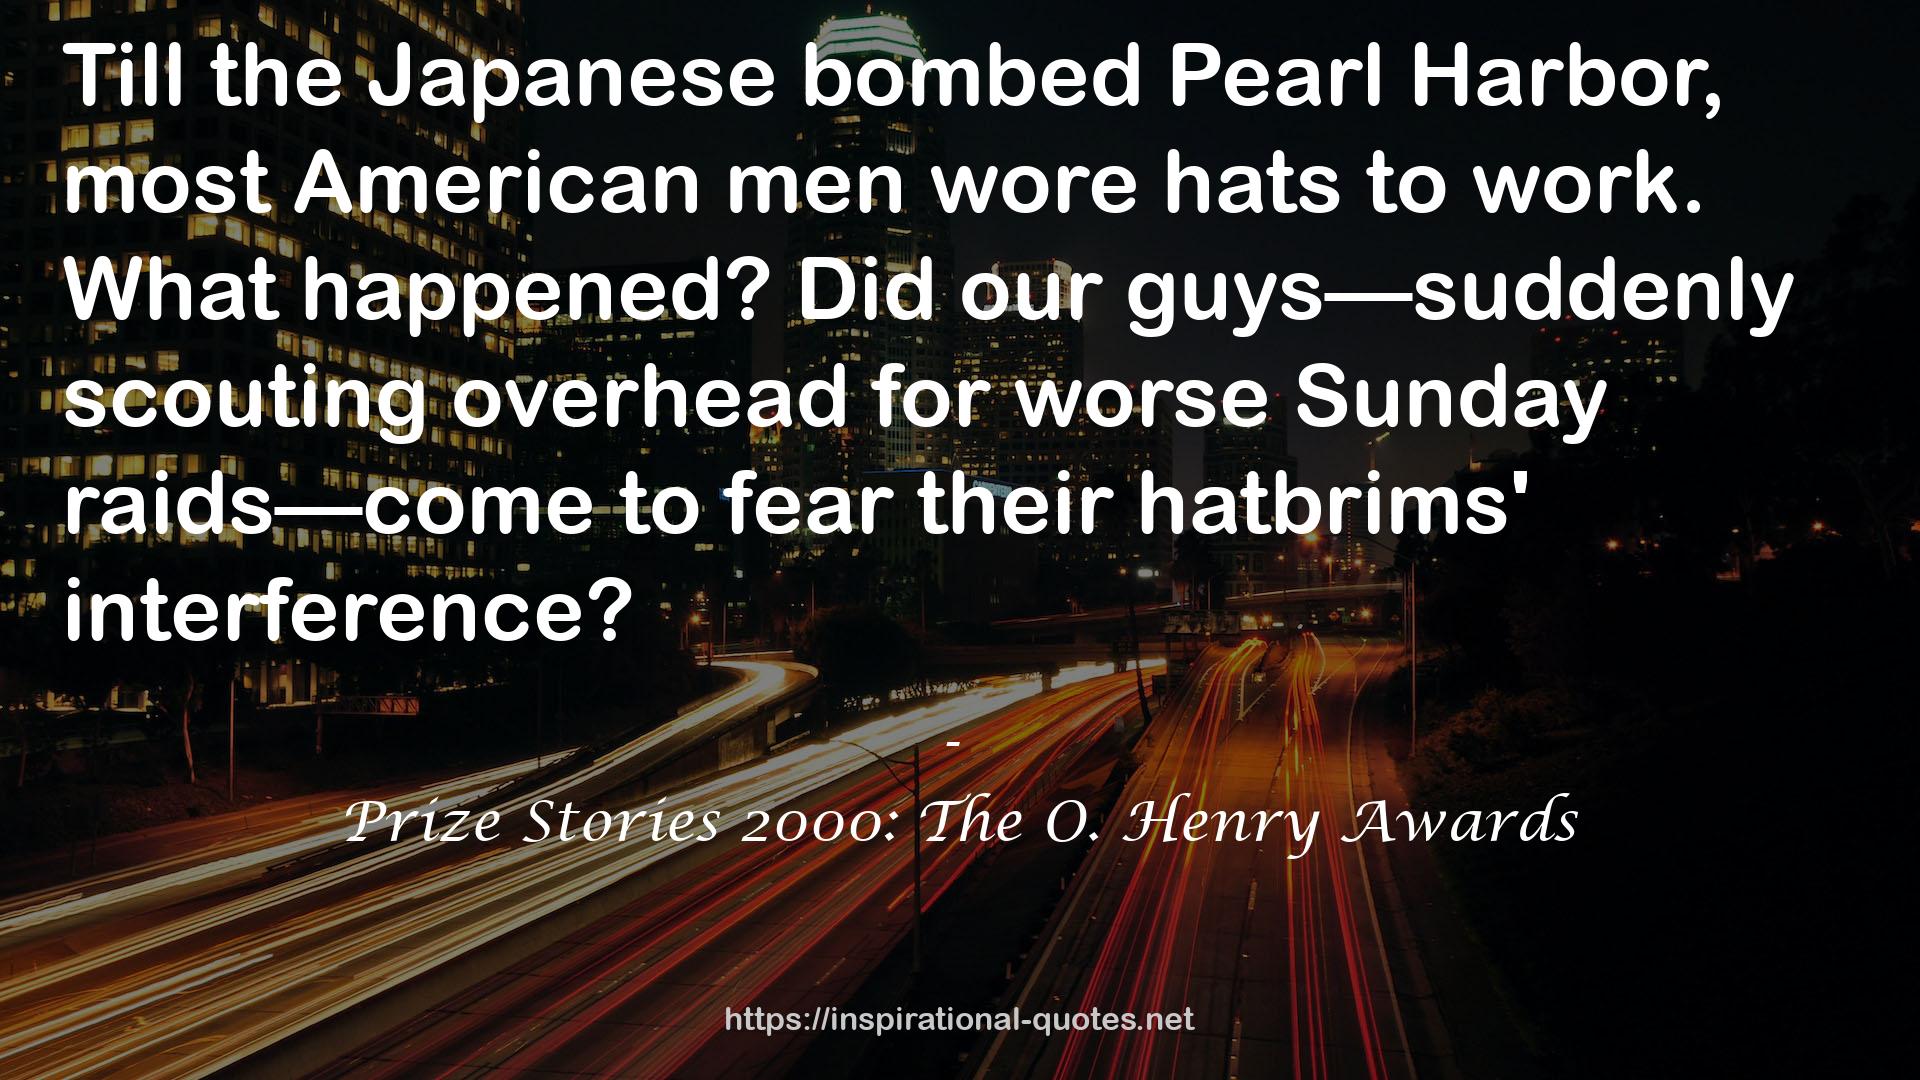 Prize Stories 2000: The O. Henry Awards QUOTES